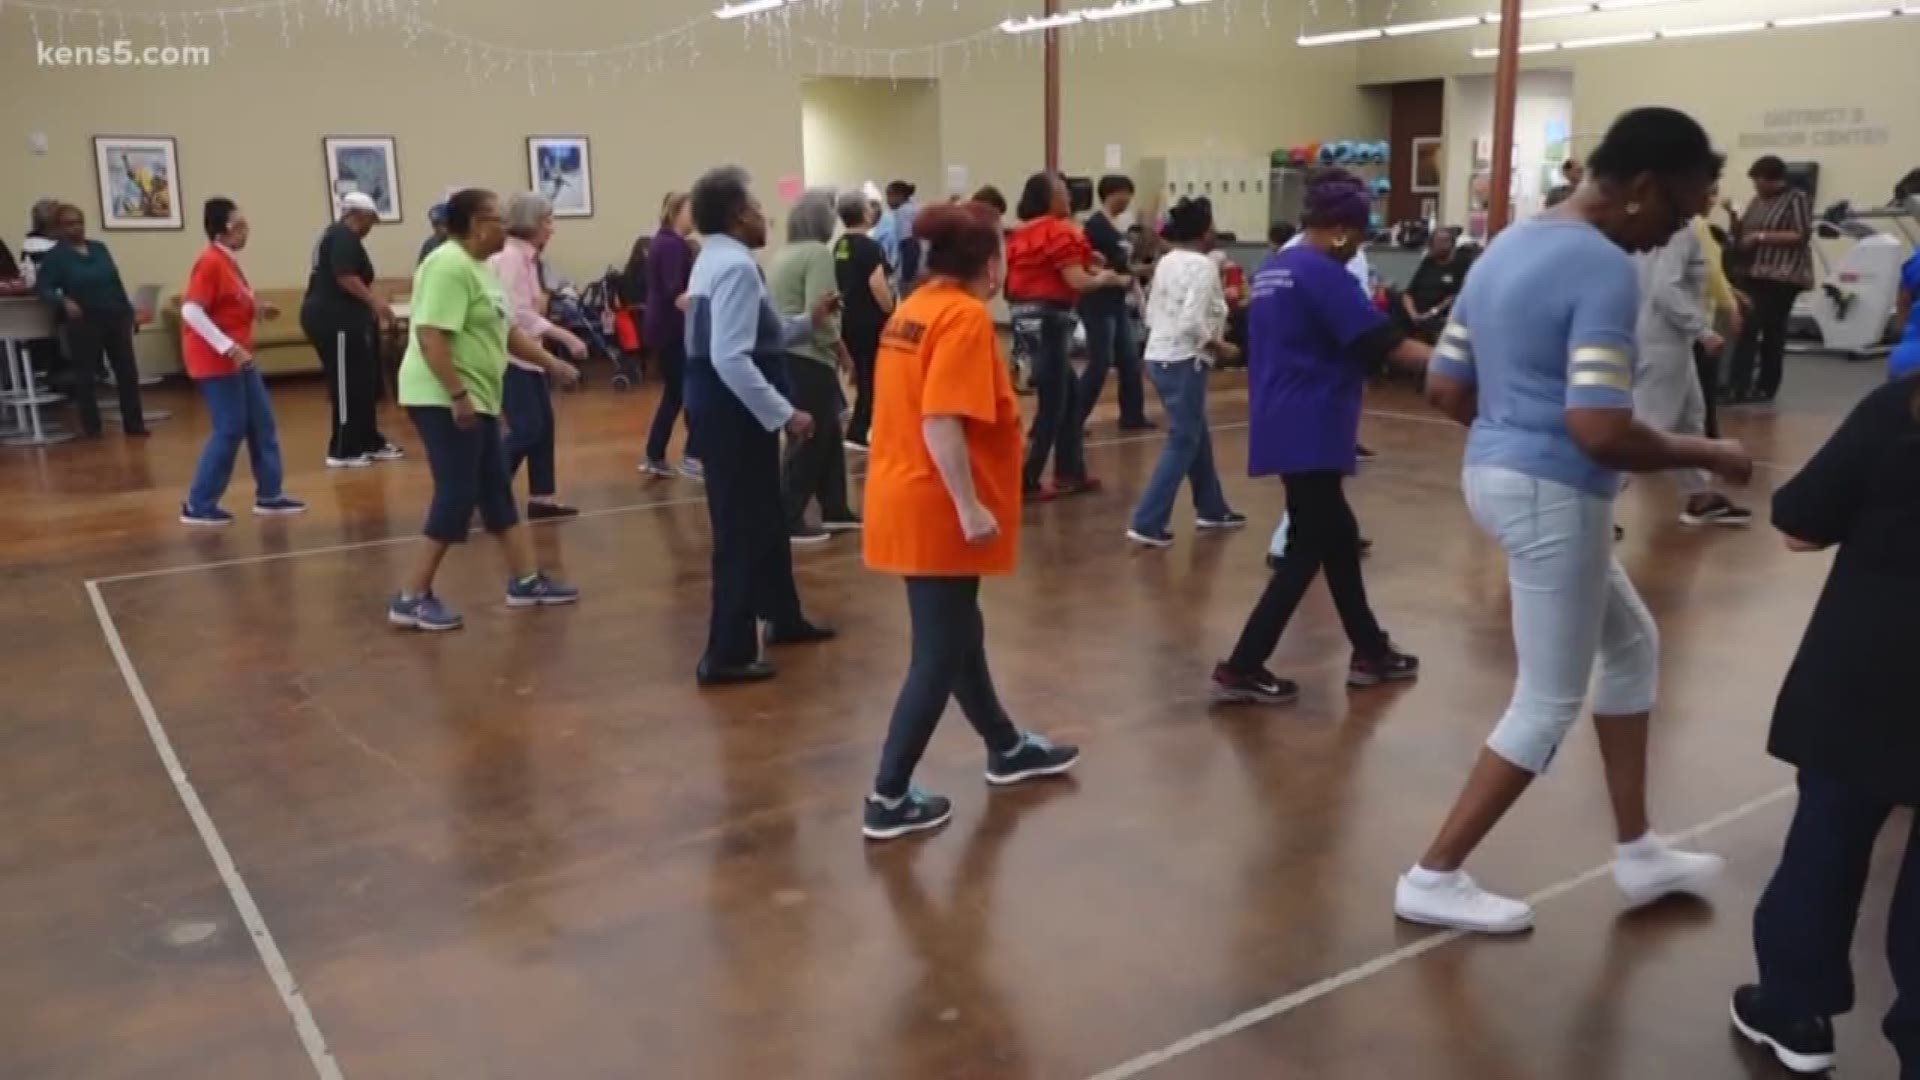 District 2 Senior Center has partnered with the YMCA to help seniors stay fit through dance